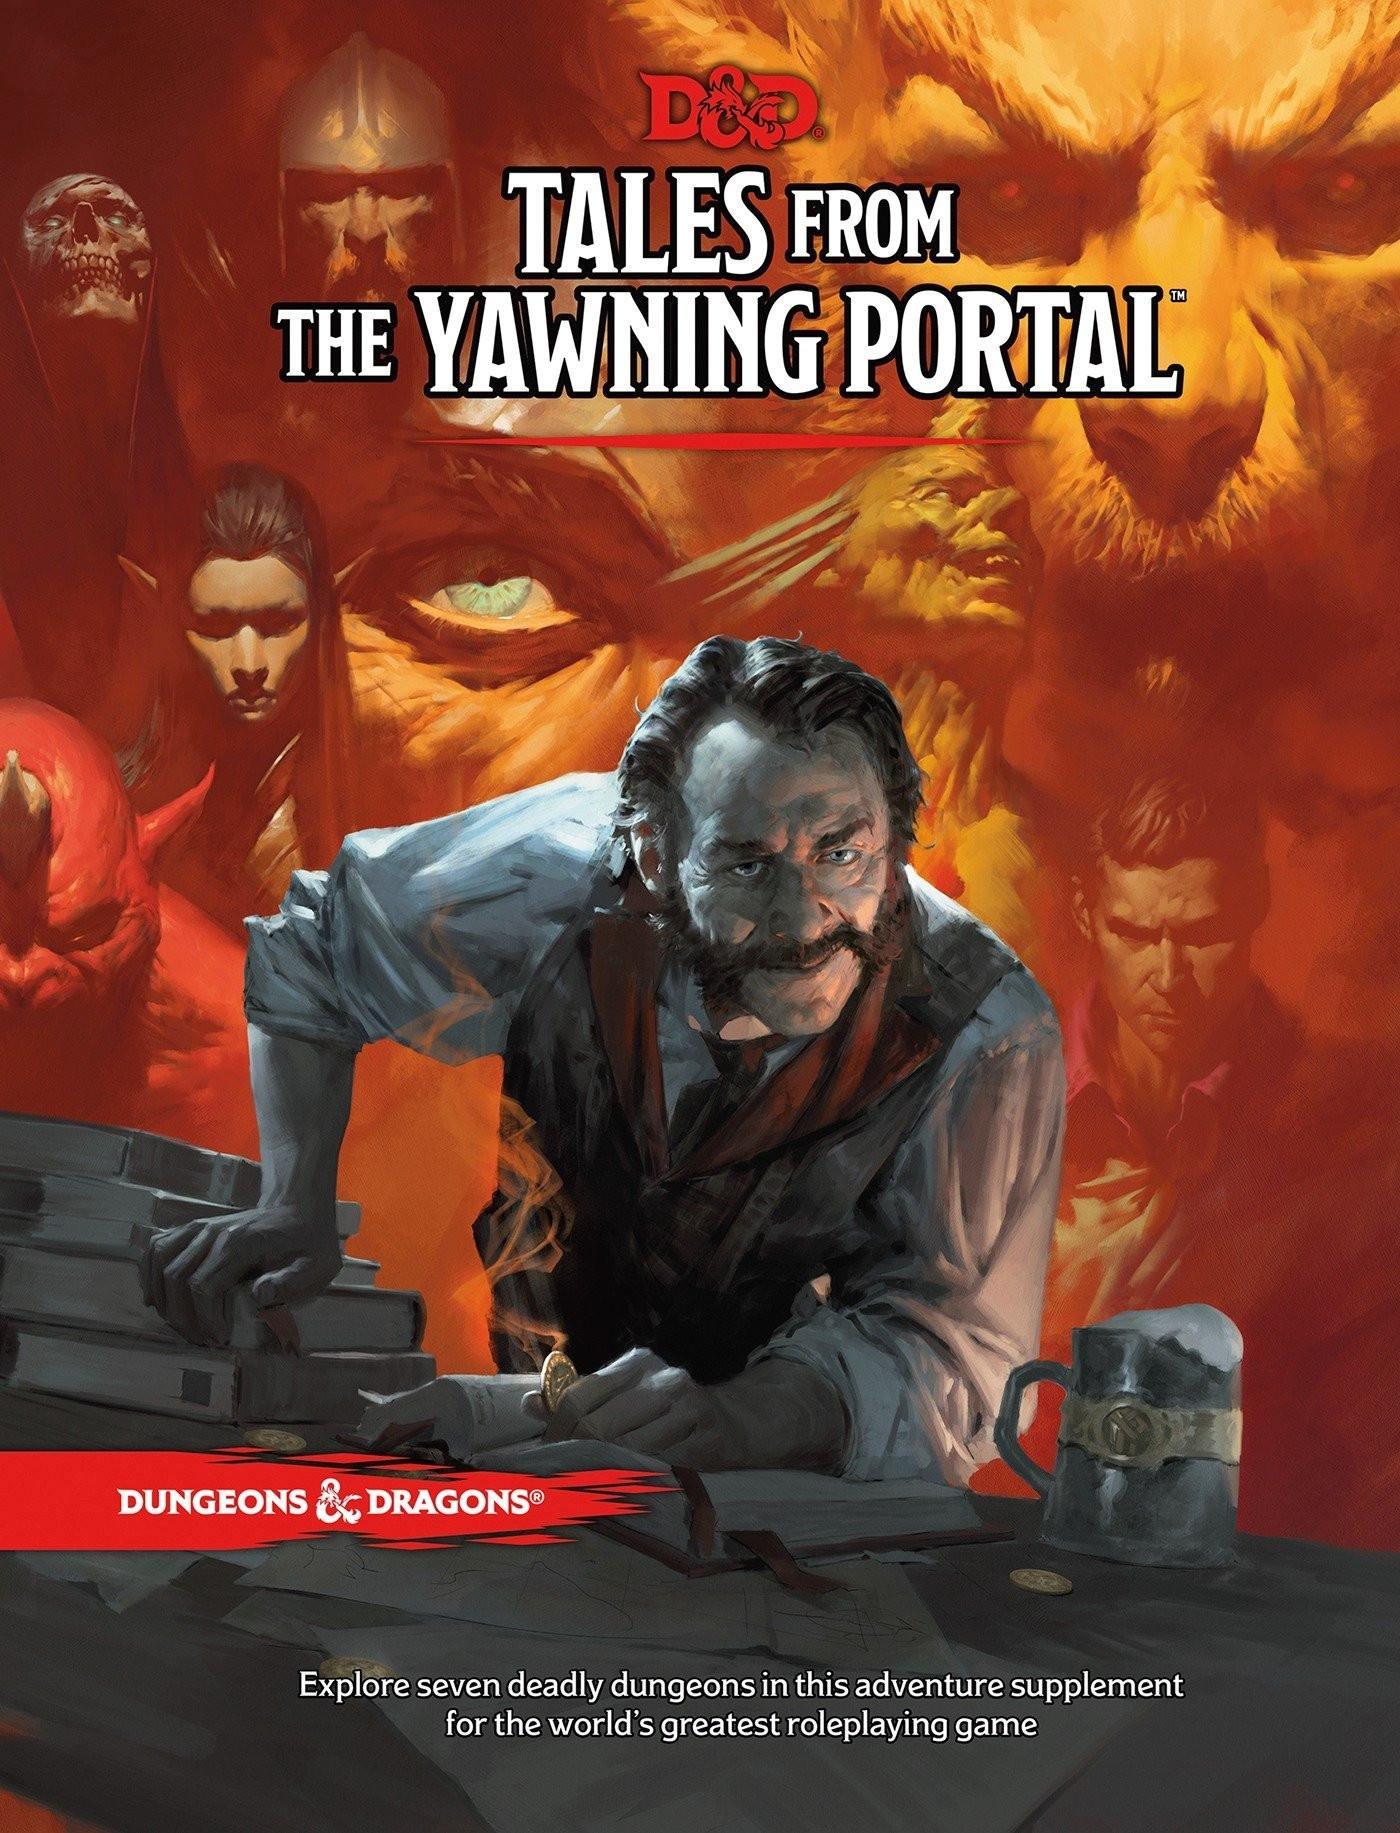 VR-87480 D&D Dungeons & Dragons Tales from the Yawning Portal Hardcover - Wizards of the Coast - Titan Pop Culture